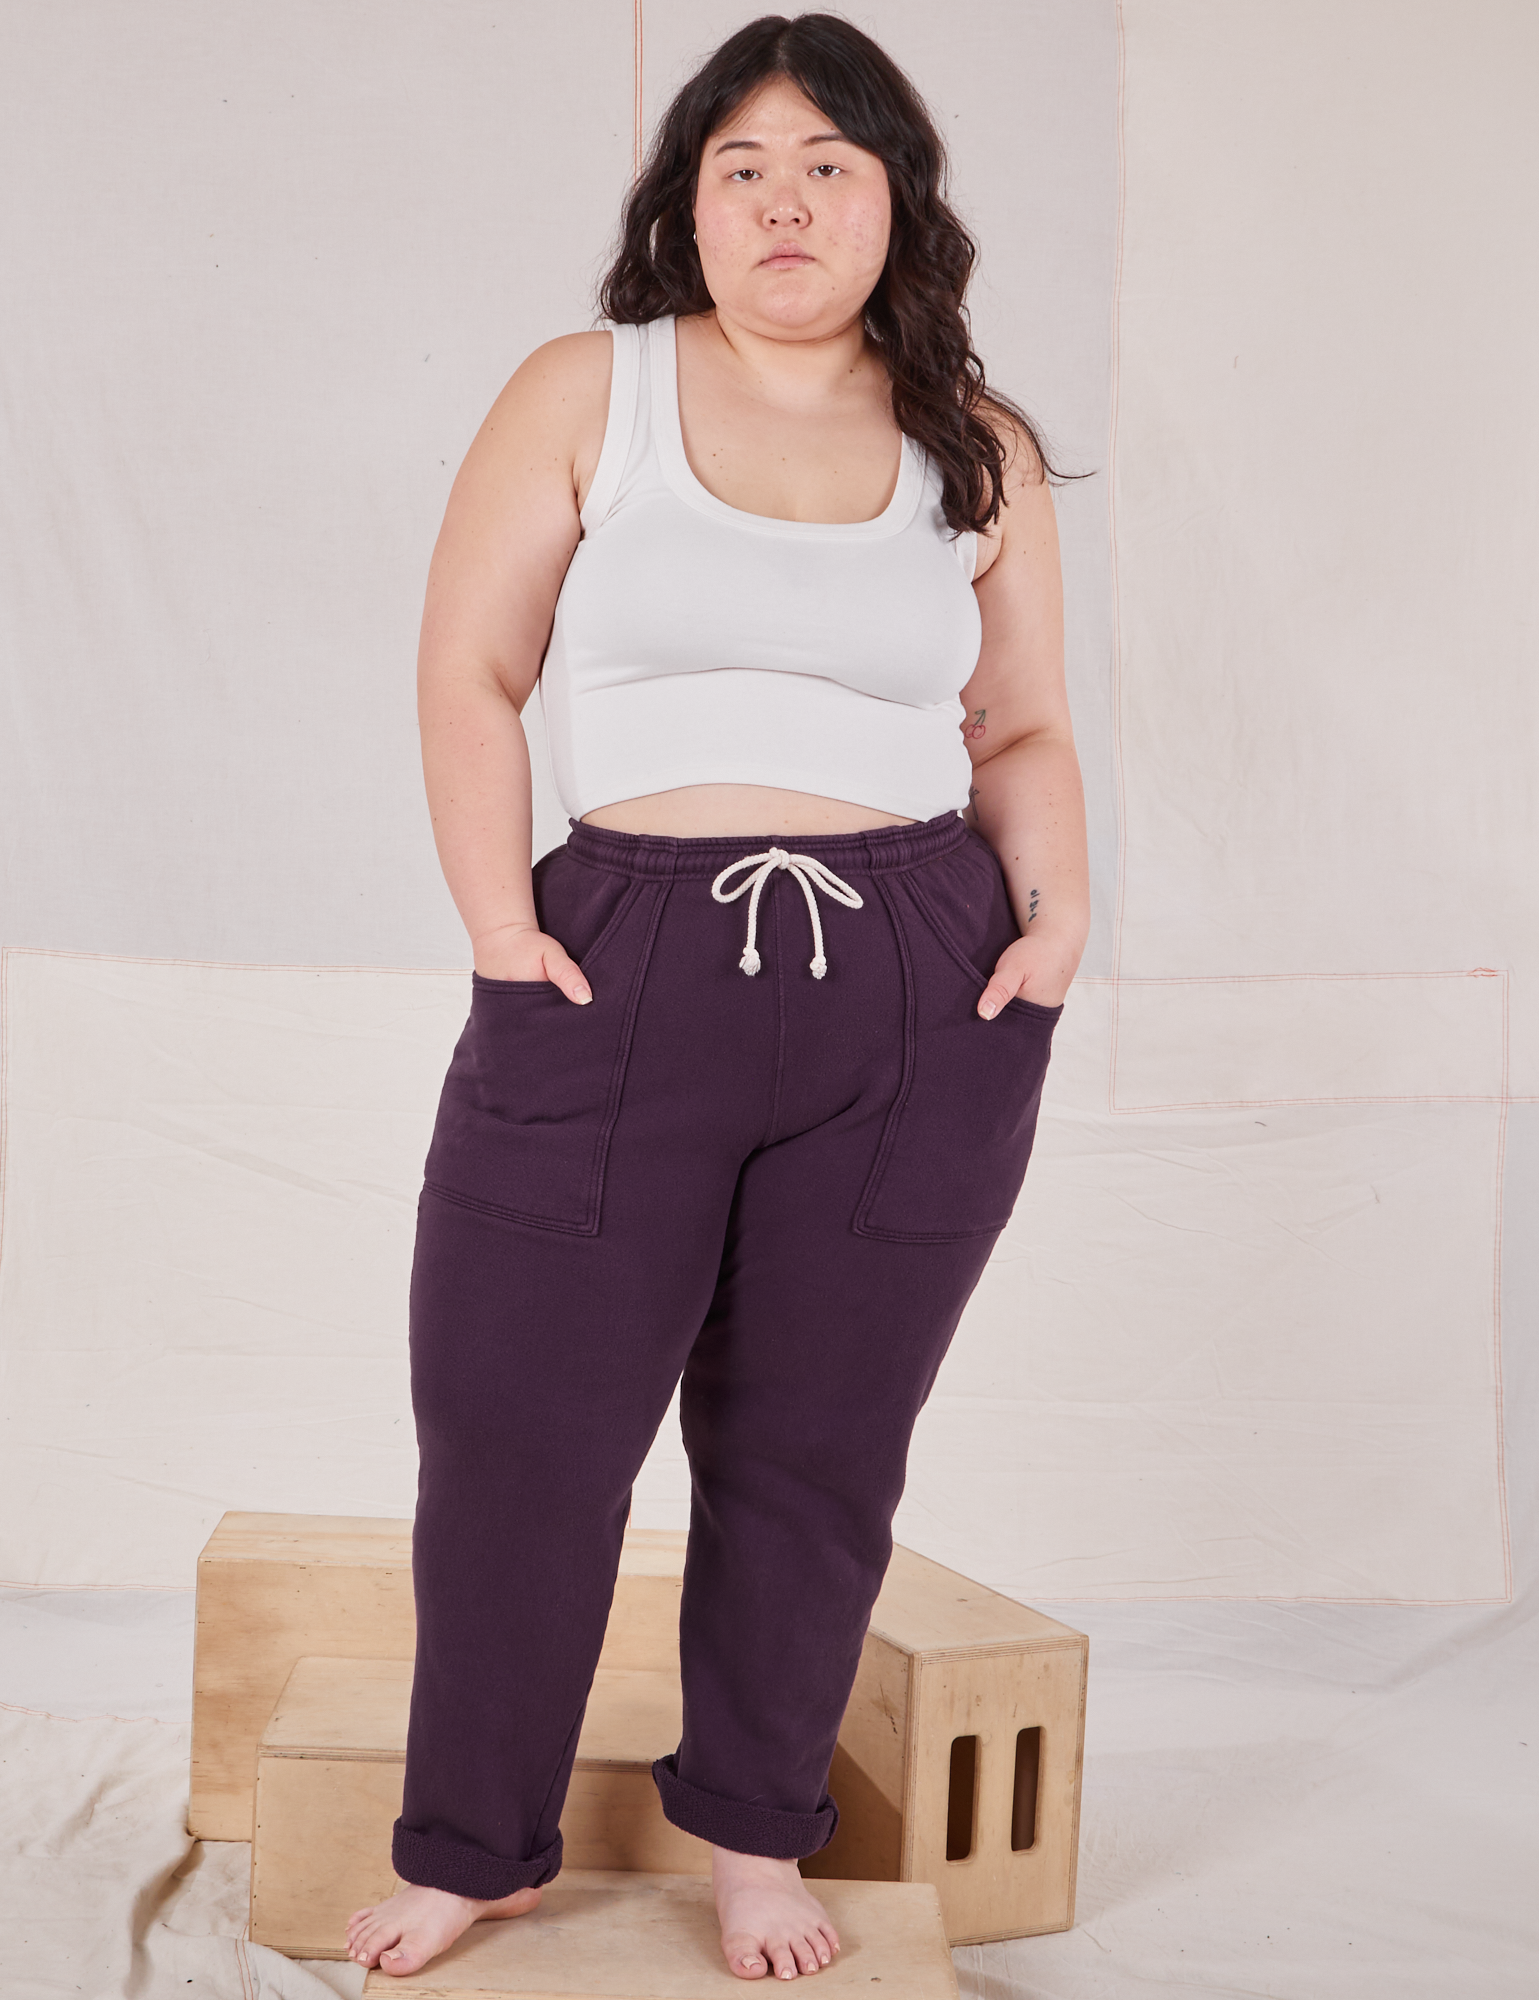 Ashley is 5&#39;7&quot; and wearing L Rolled Cuff Sweat Pants in Nebula Purple paired with vintage off-white Cropped Tank